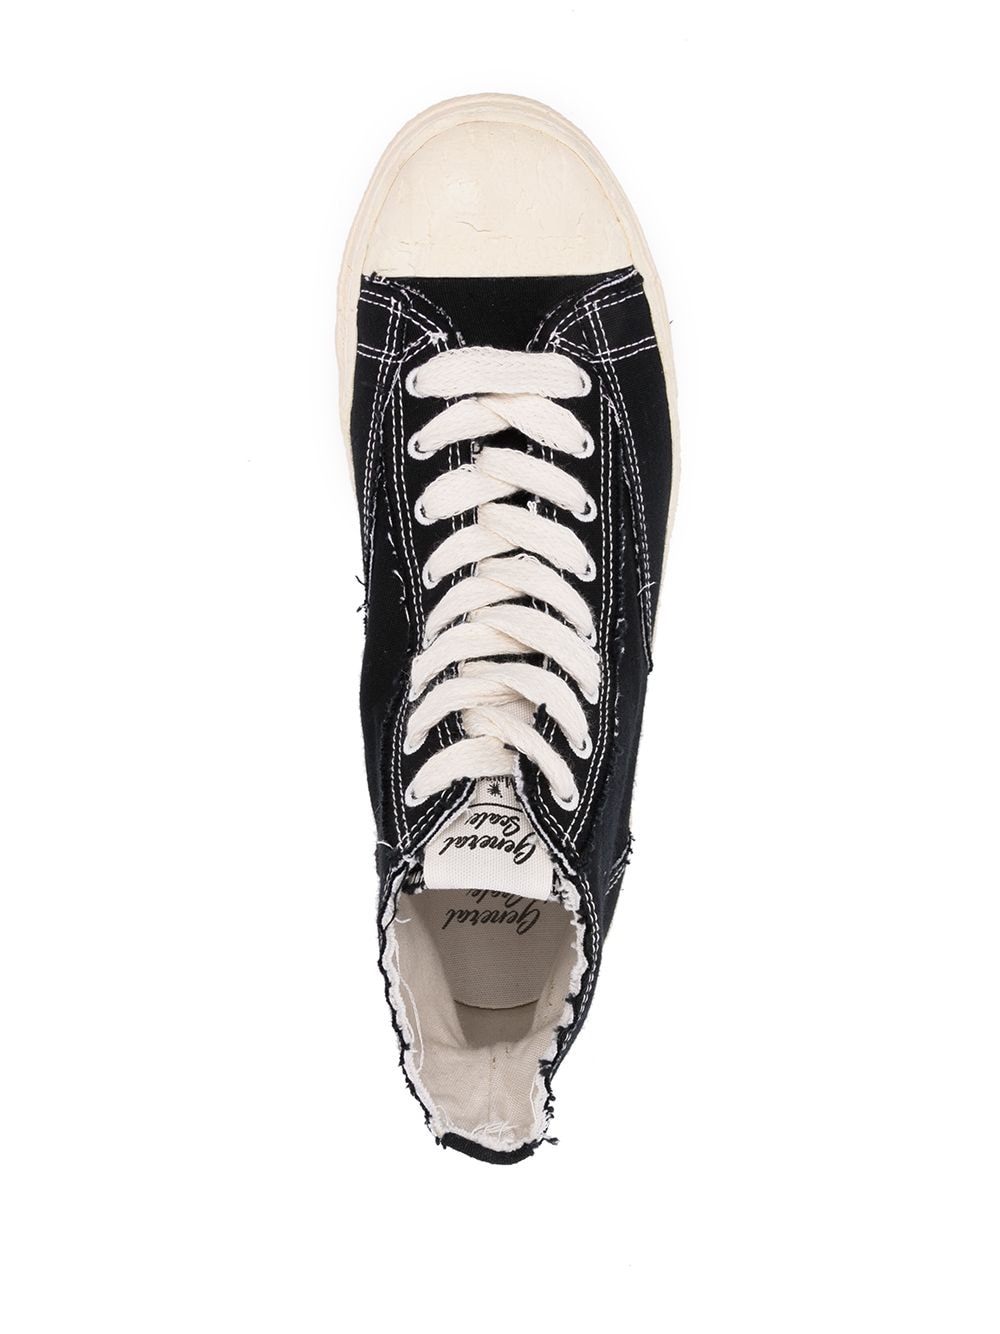 Maison Mihara Yasuhiro General Scale lace-up high-top Sneakers - Farfetch